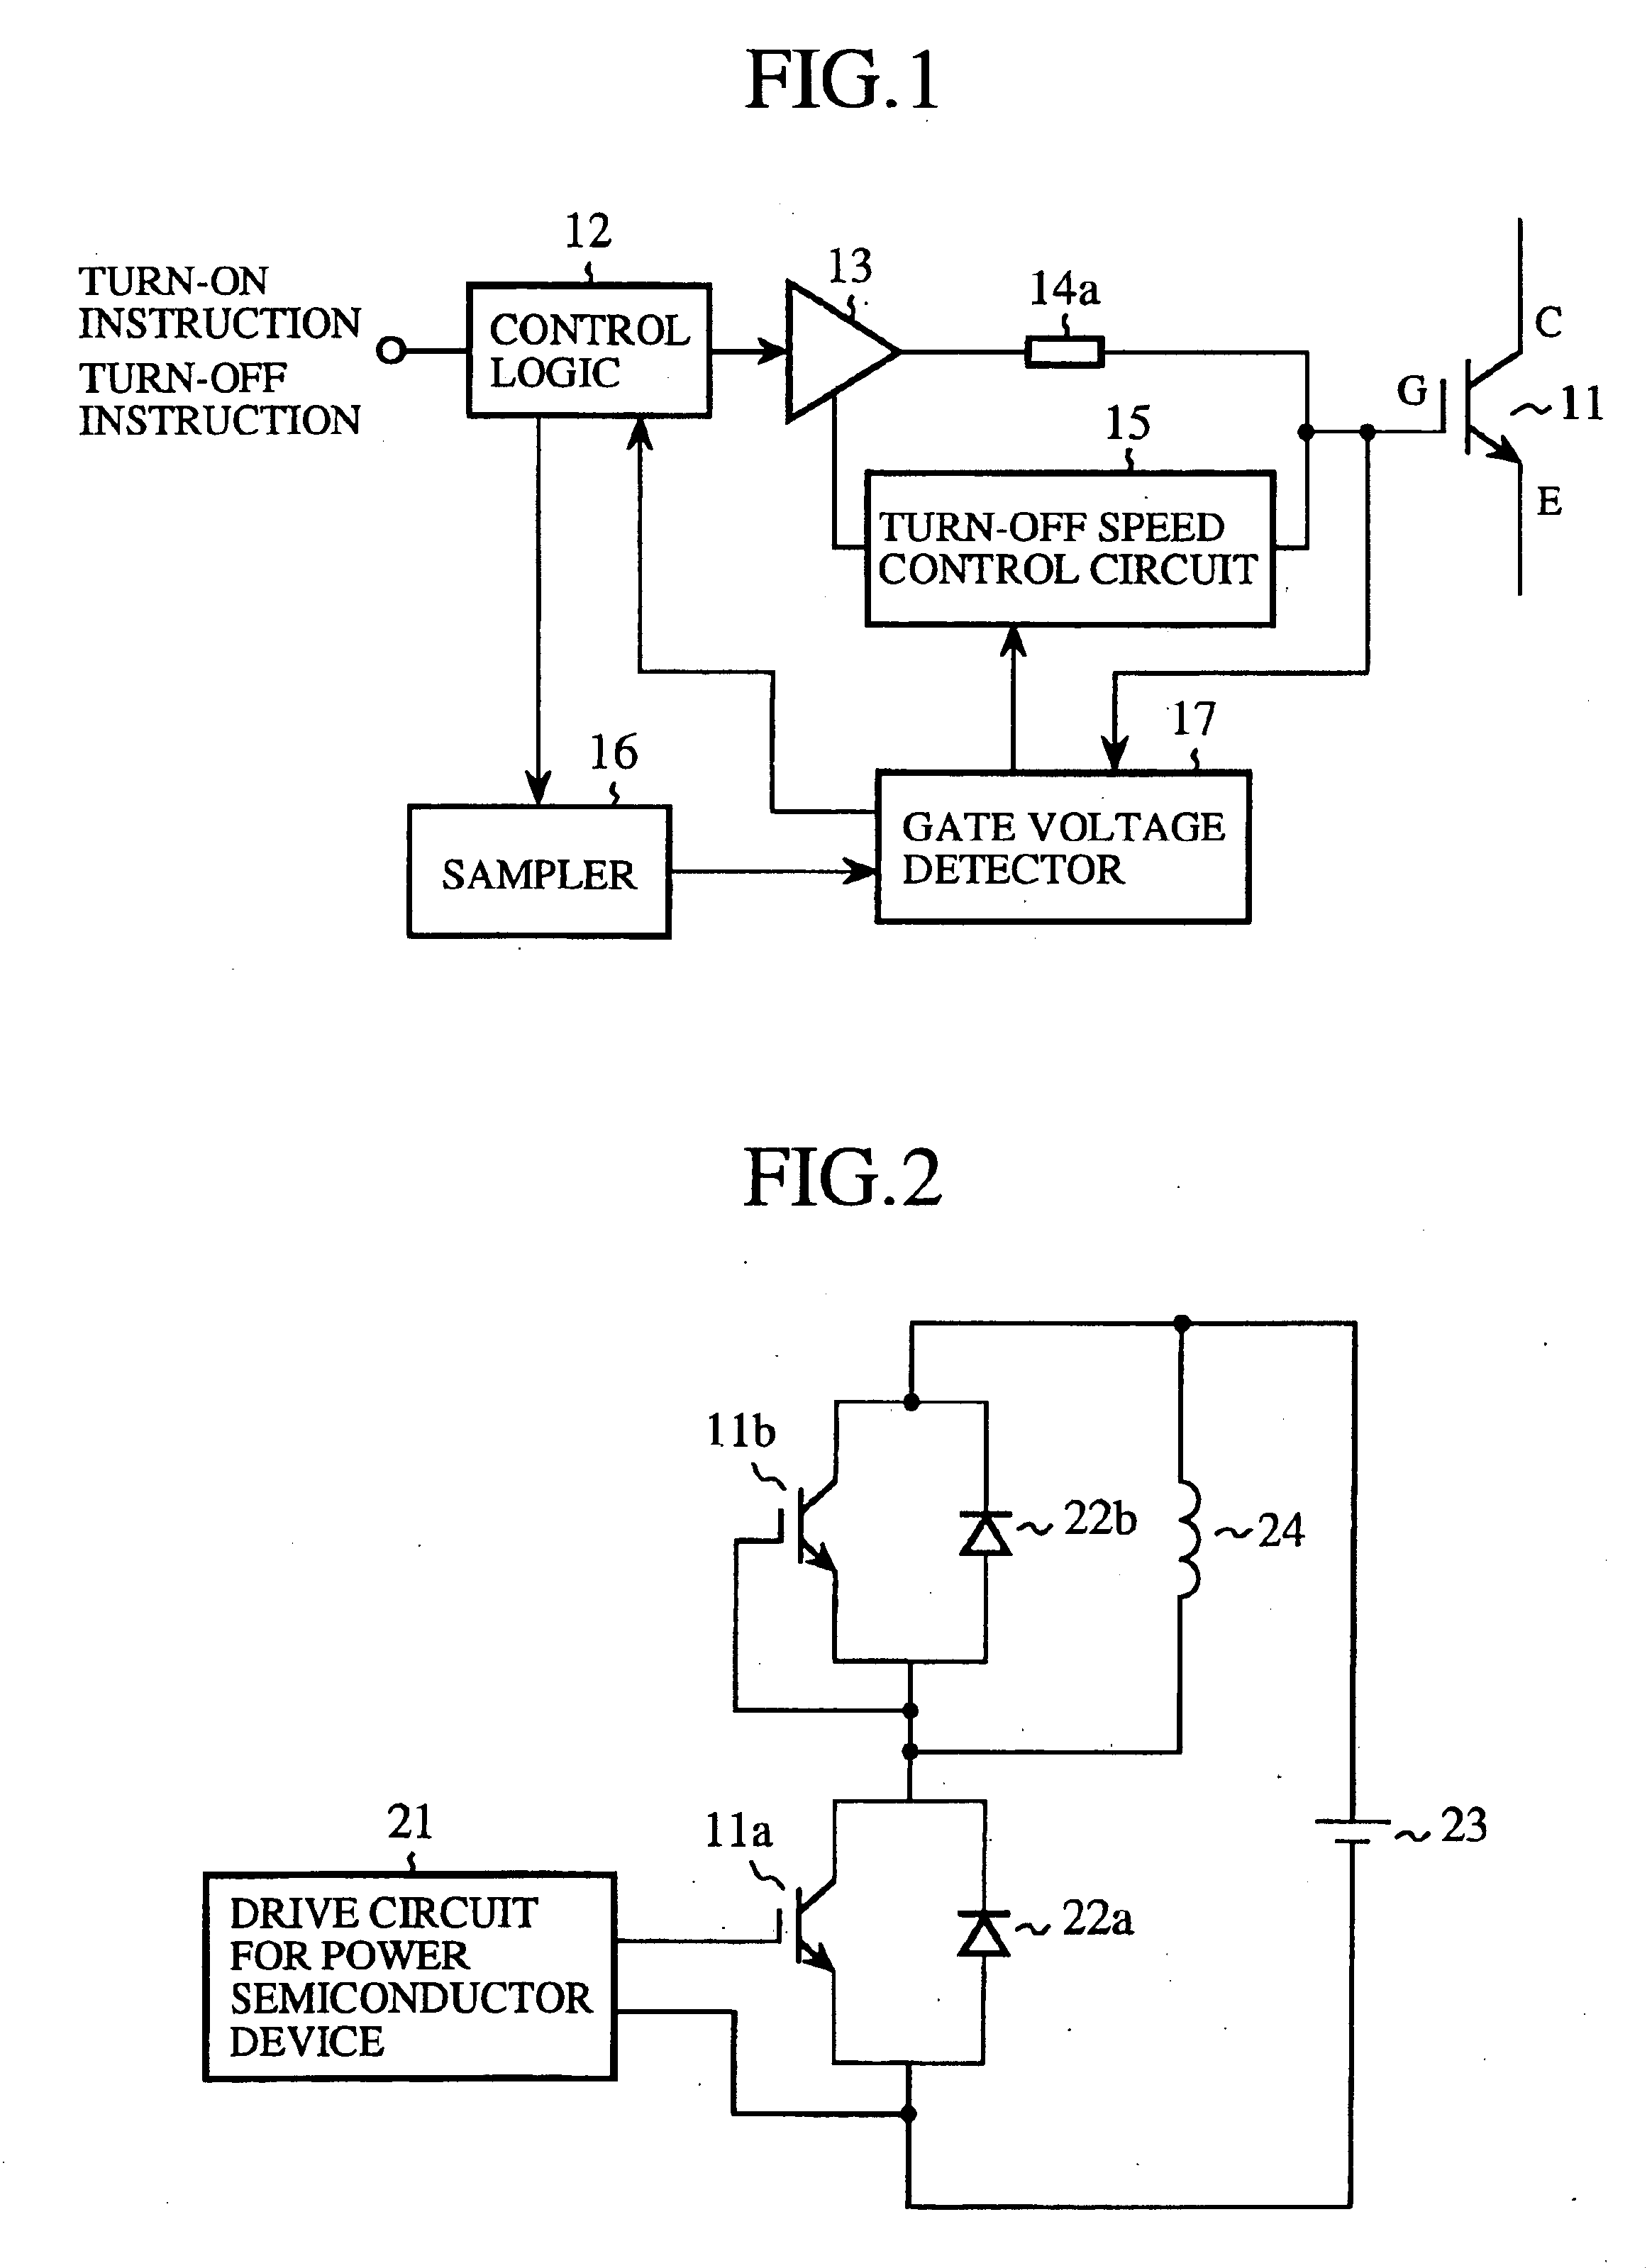 Drive circuit for driving power semiconductor device